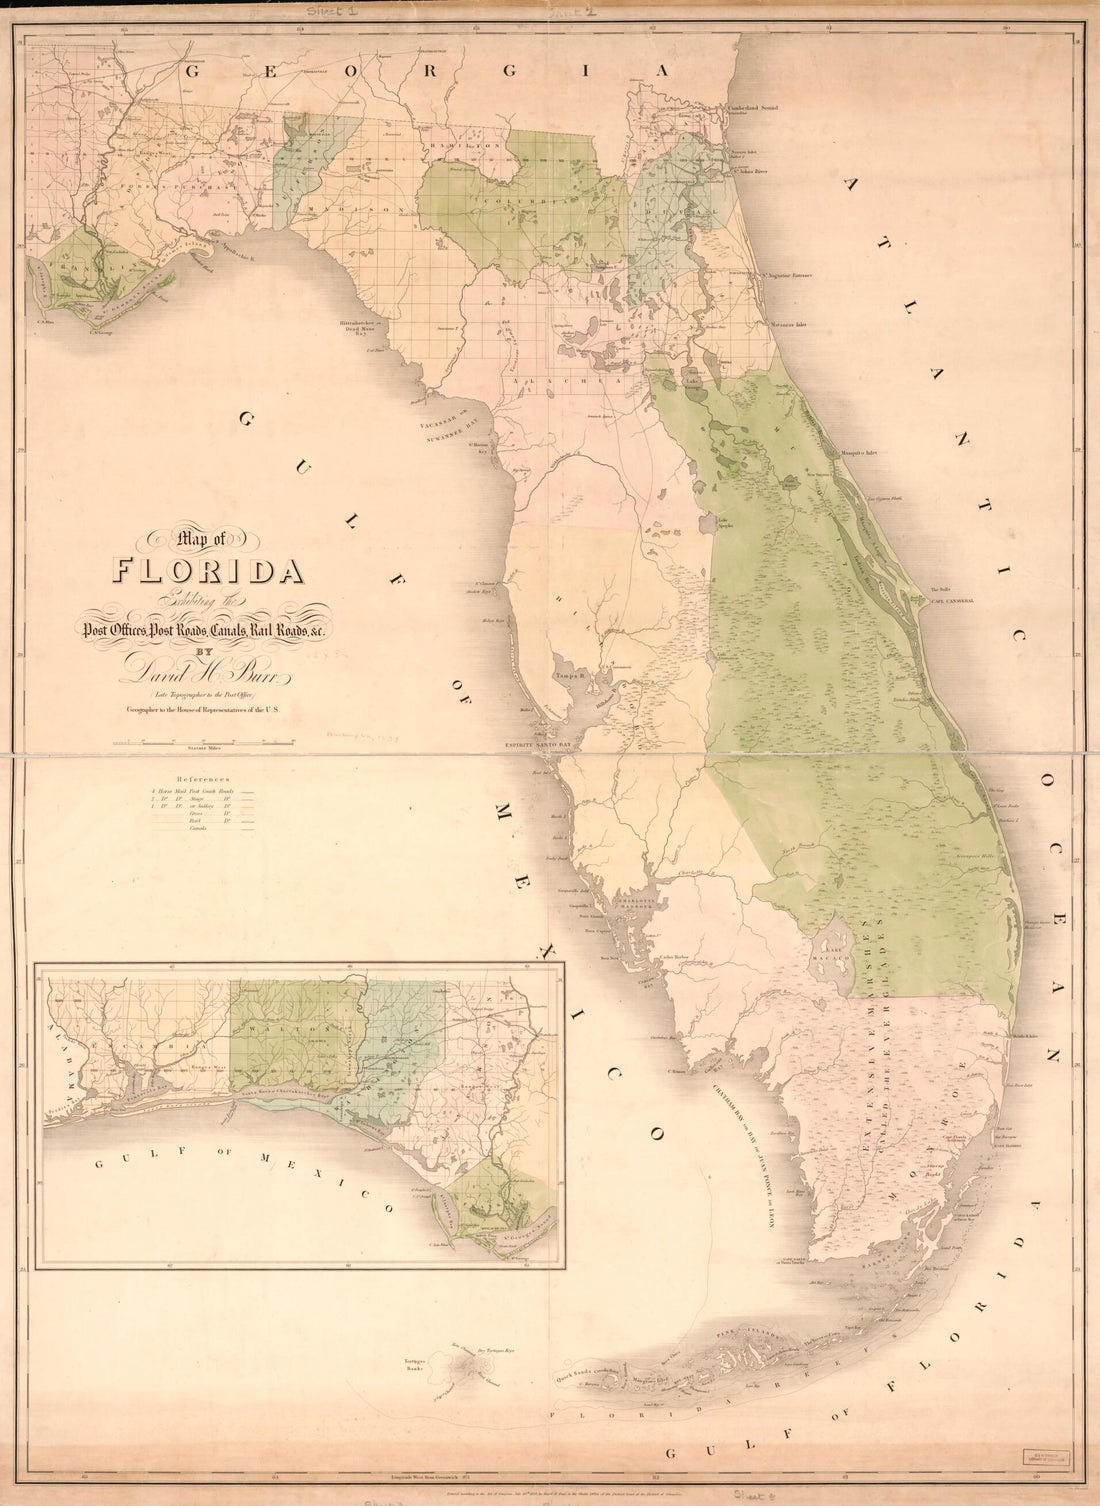 This old map of Map of Florida : Exhibiting the Post Offices, Post Roads, Canals, Rail Roads, &amp;c from 1839 was created by John Arrowsmith, David H. Burr in 1839